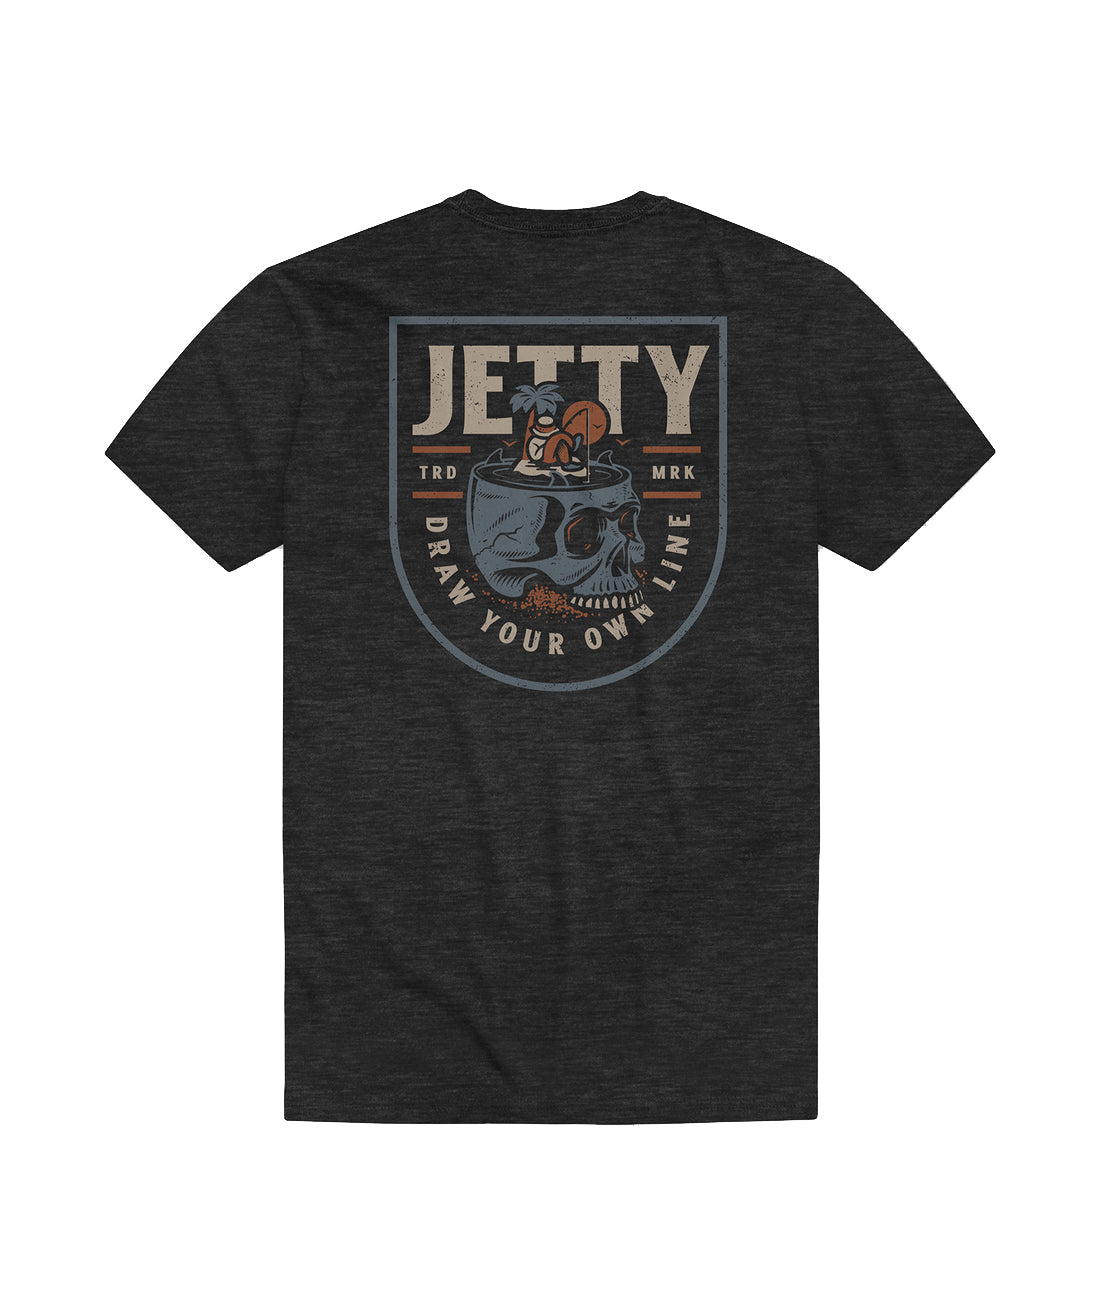 Jetty Stranded SS Tee Charcoal L